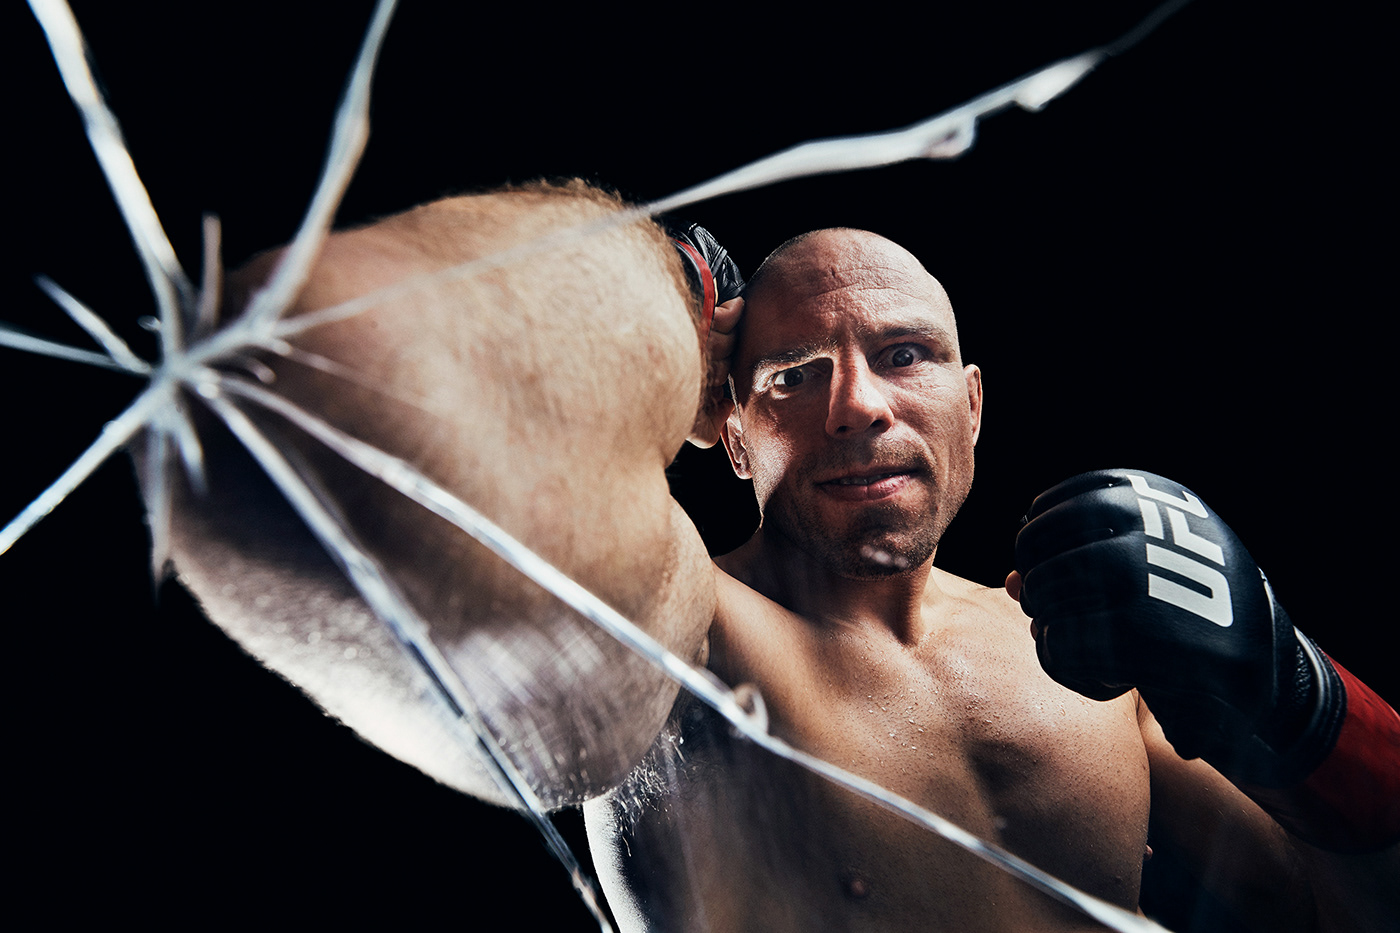 MMA UFC Fighter Mark O Madsen fighting Mixed martial arts sport sports portrait Photography 